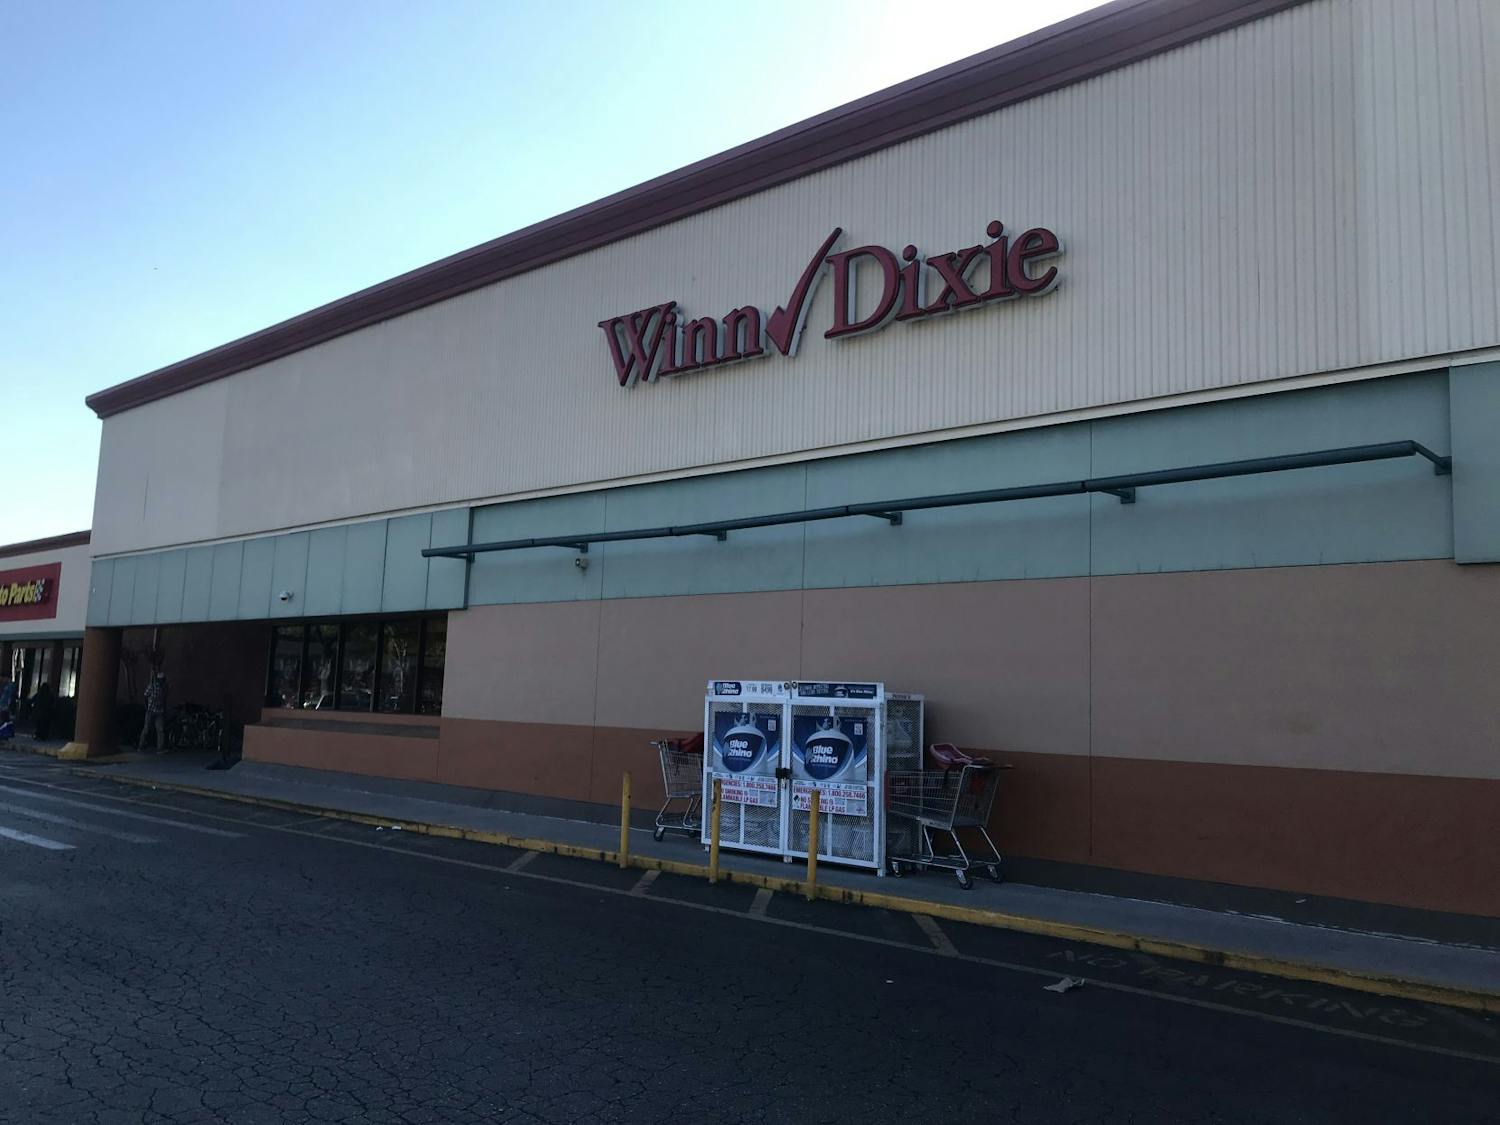 The Winn-Dixie at 2002 SW 34th St. is one of 94 underperforming stores under the parent company Southeastern Grocers that will be closed as the company prepares to file for bankruptcy at the end of March.